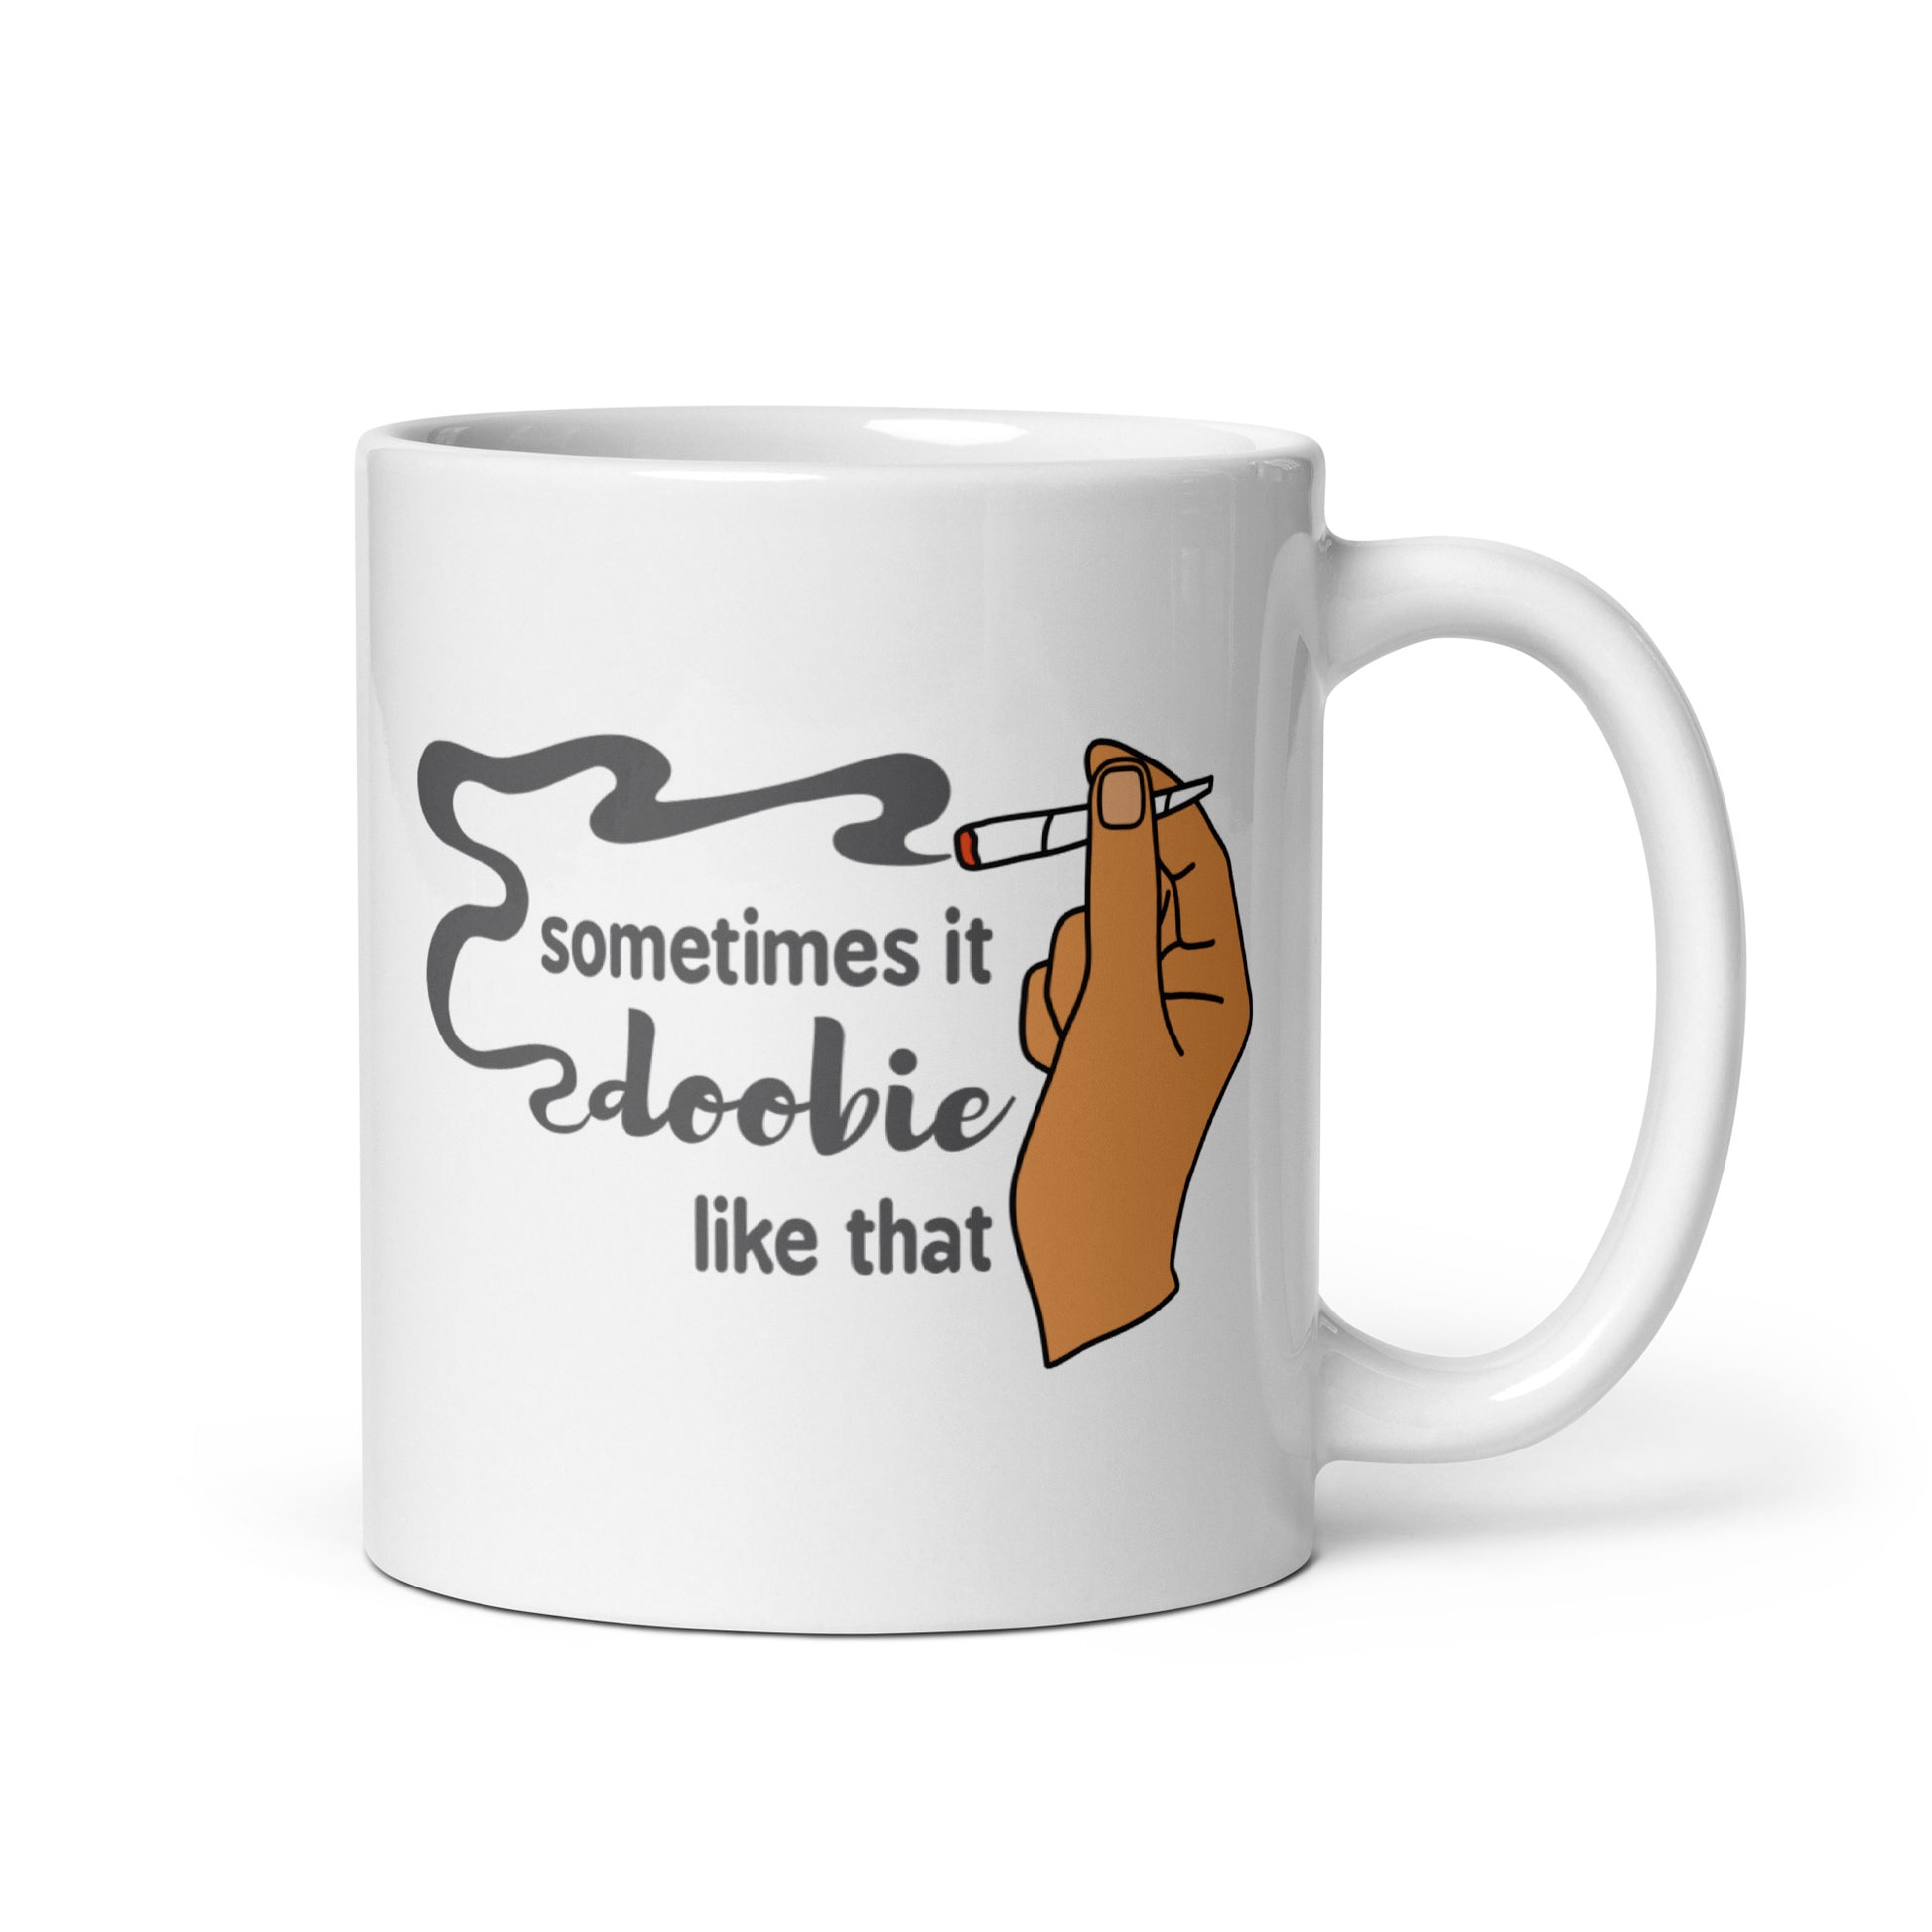 A white 11 ounce ceramic coffee cup featuring an illustration of a hand with medium-toned skin holding a joint. Text alongside the hand reads "sometimes it doobie like that" with the word "doobie" made from smoke from the joint.